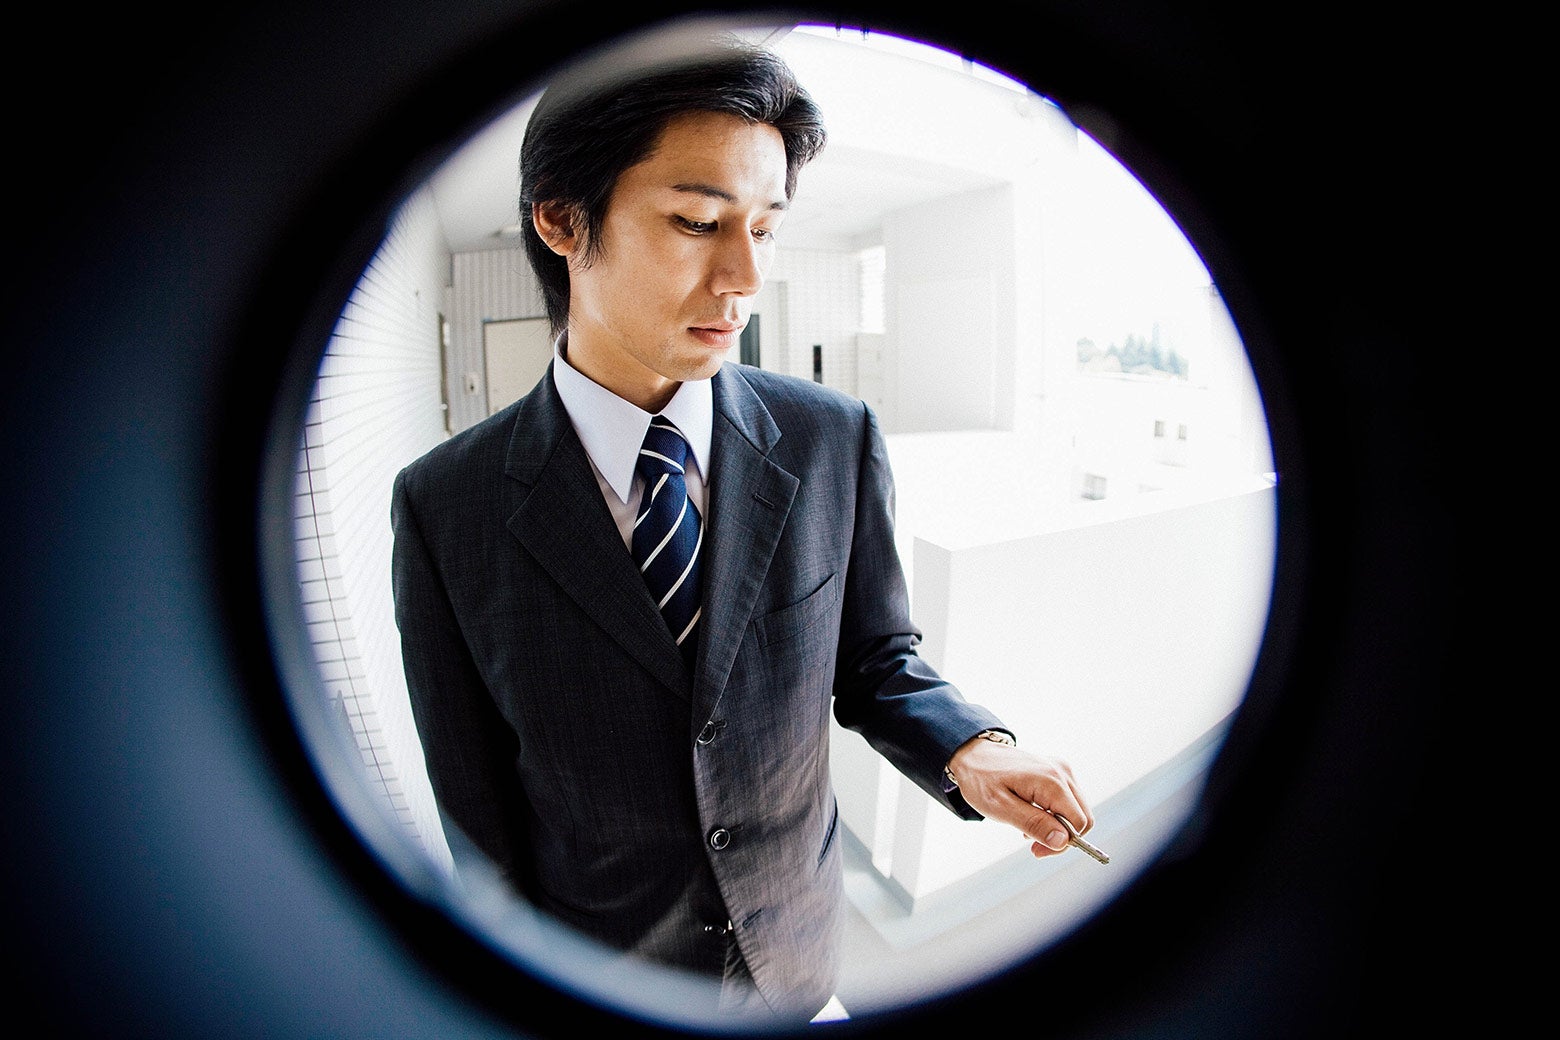 Fisheye peephole view of a man in a suit at the door.